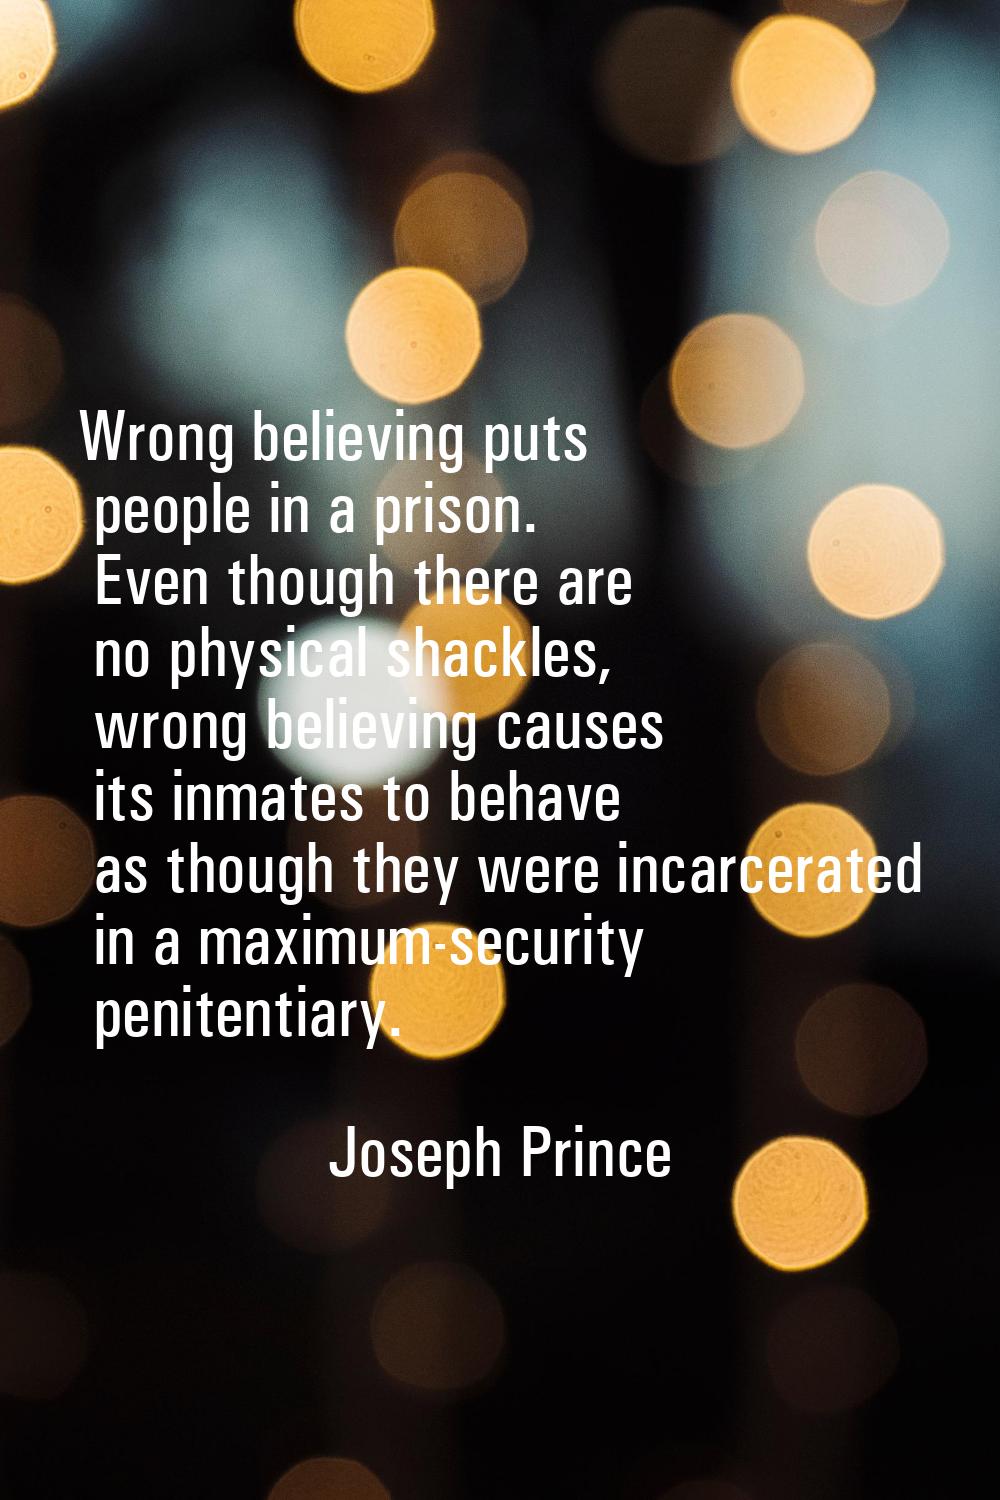 Wrong believing puts people in a prison. Even though there are no physical shackles, wrong believin